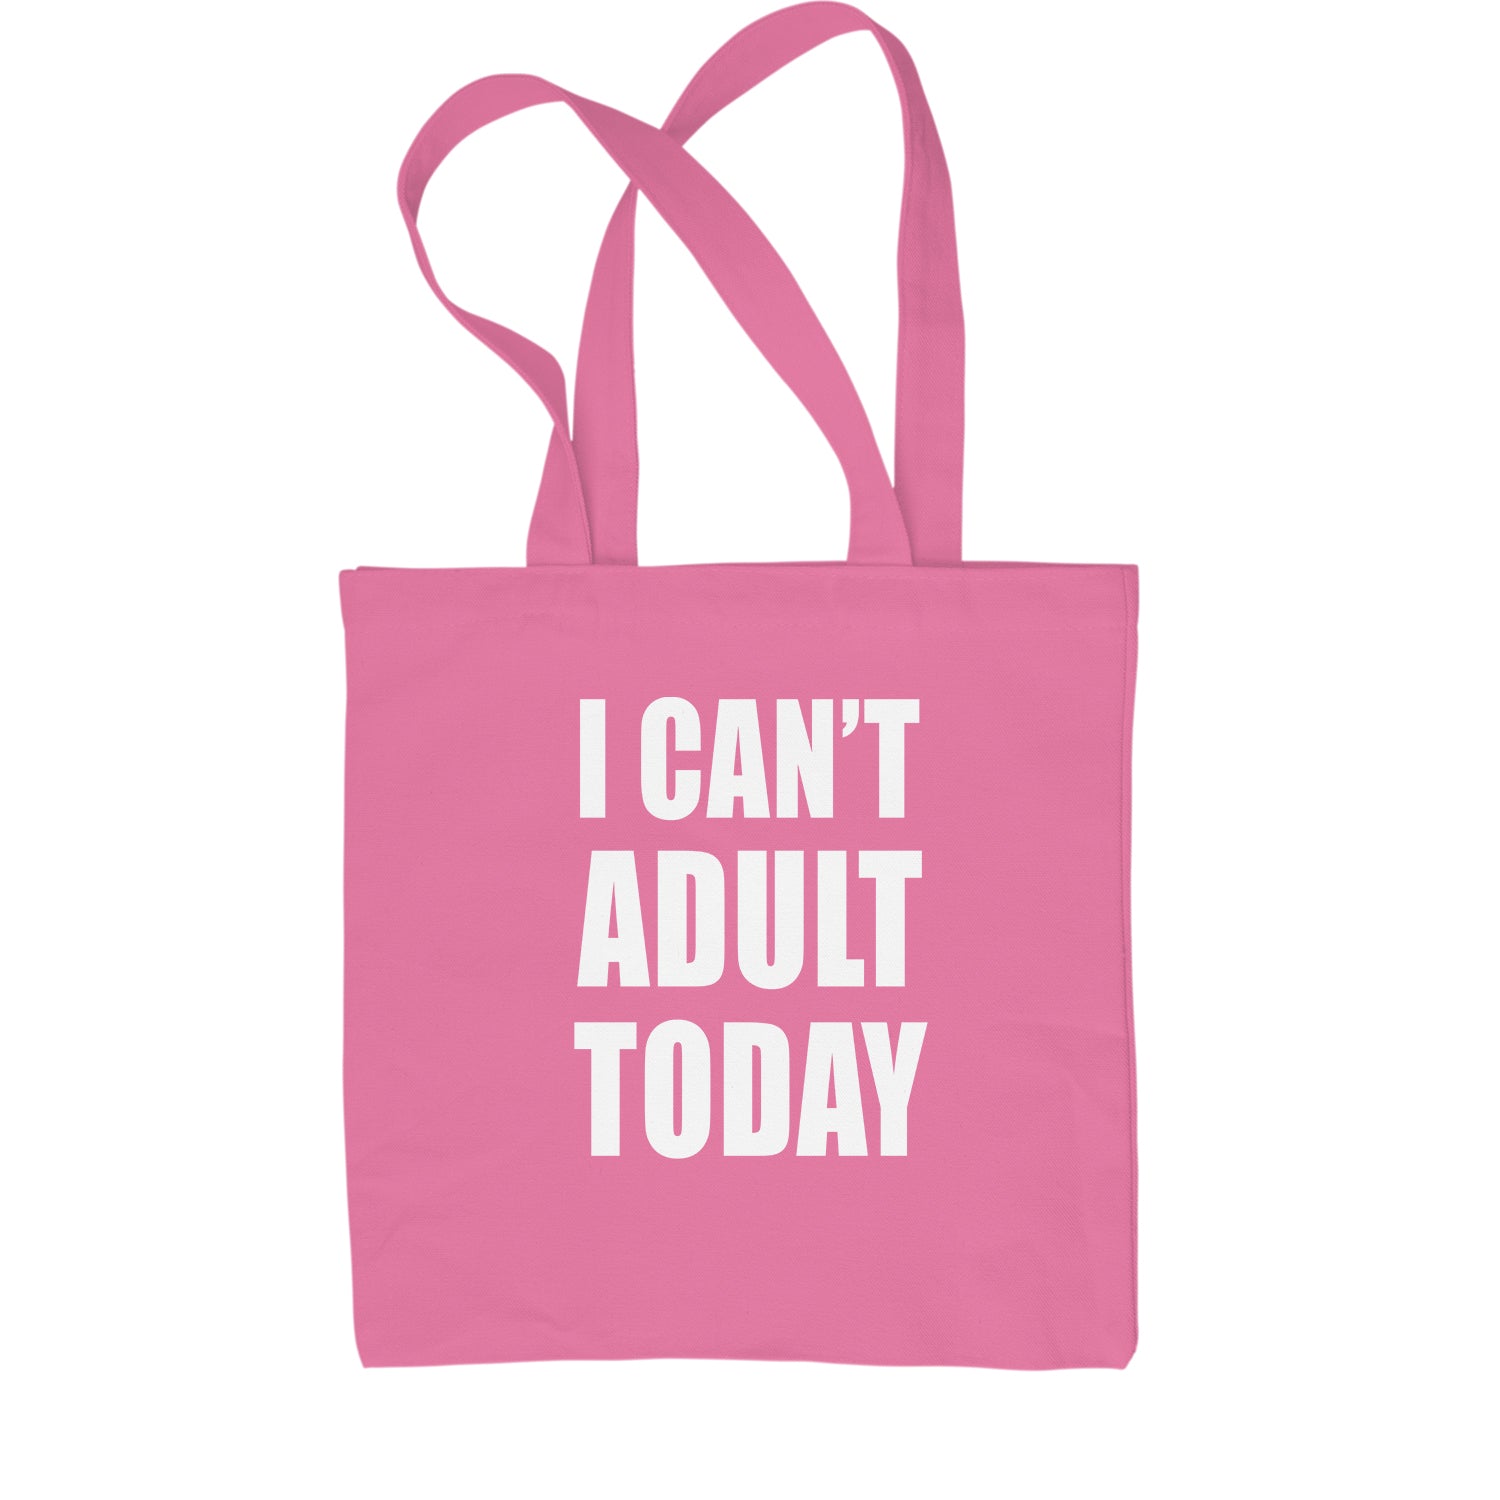 I Can't Adult Today Shopping Tote Bag adult, cant, I, today by Expression Tees